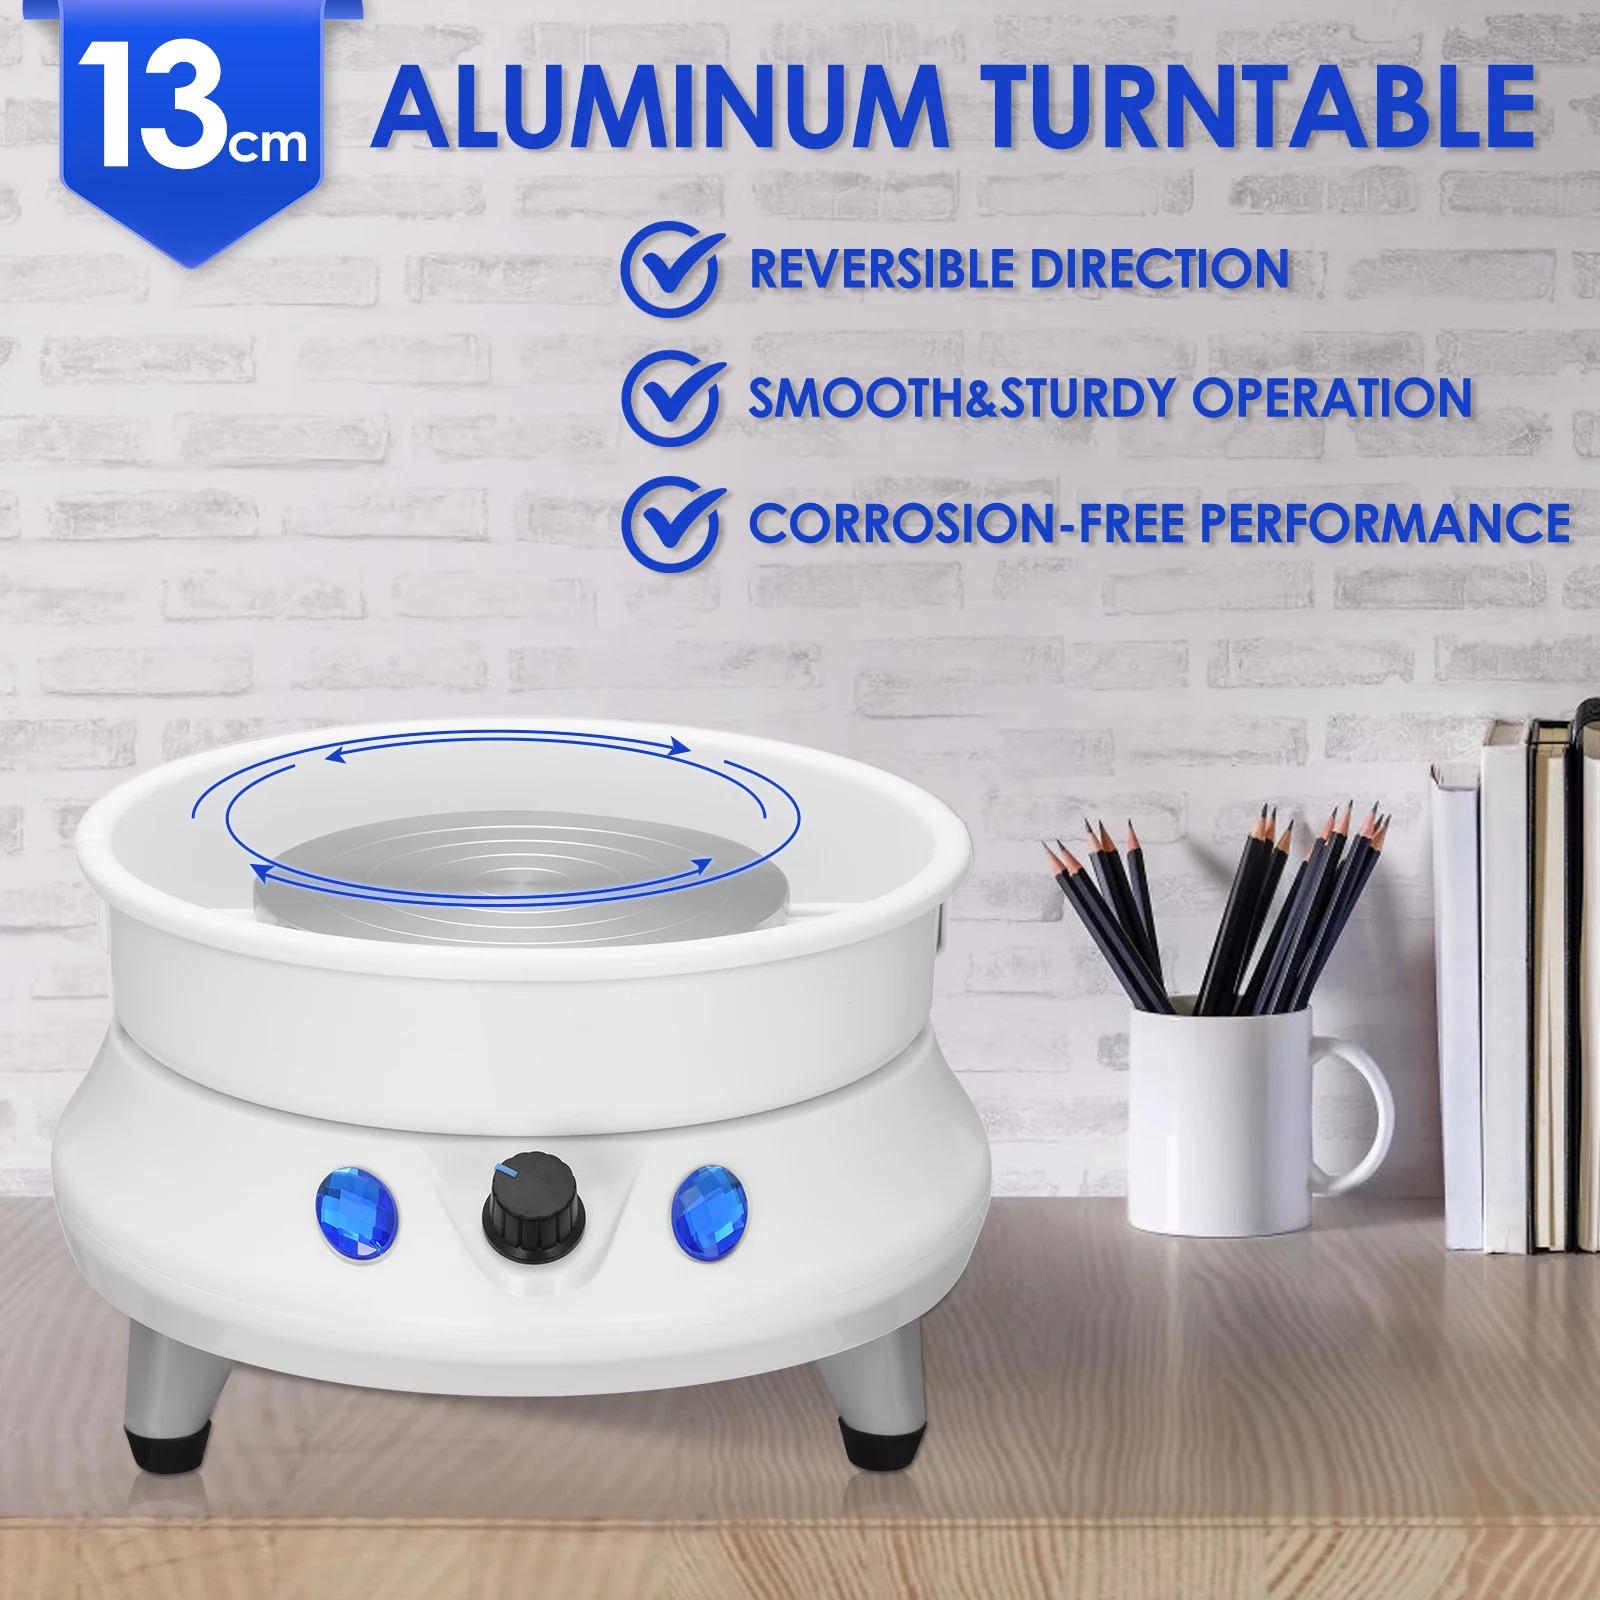 

110-220V Automatic Electric Pottery Wheel Machine Ceramic Work Adjustable Speed 13cm Turntable Circle Potters DIY Clay Art Craft